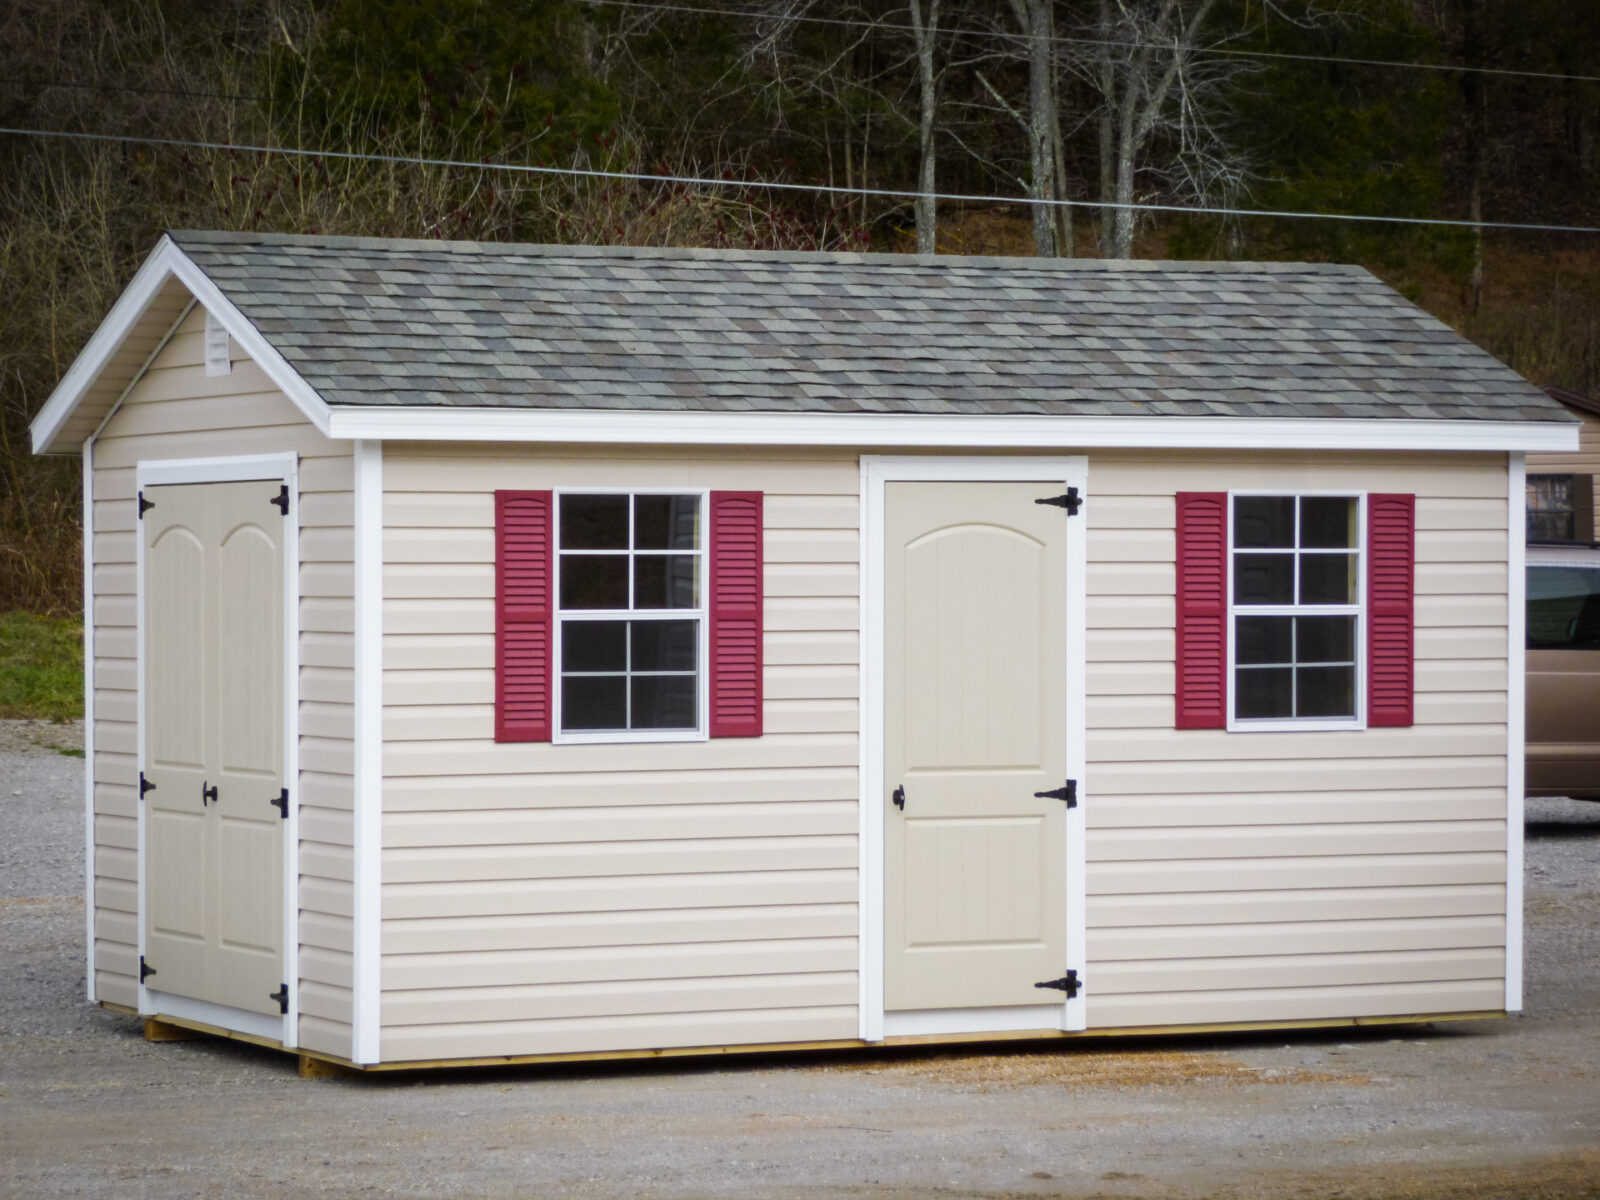 A storage shed in Kentucky with vinyl siding, double doors, and windows with red shutters